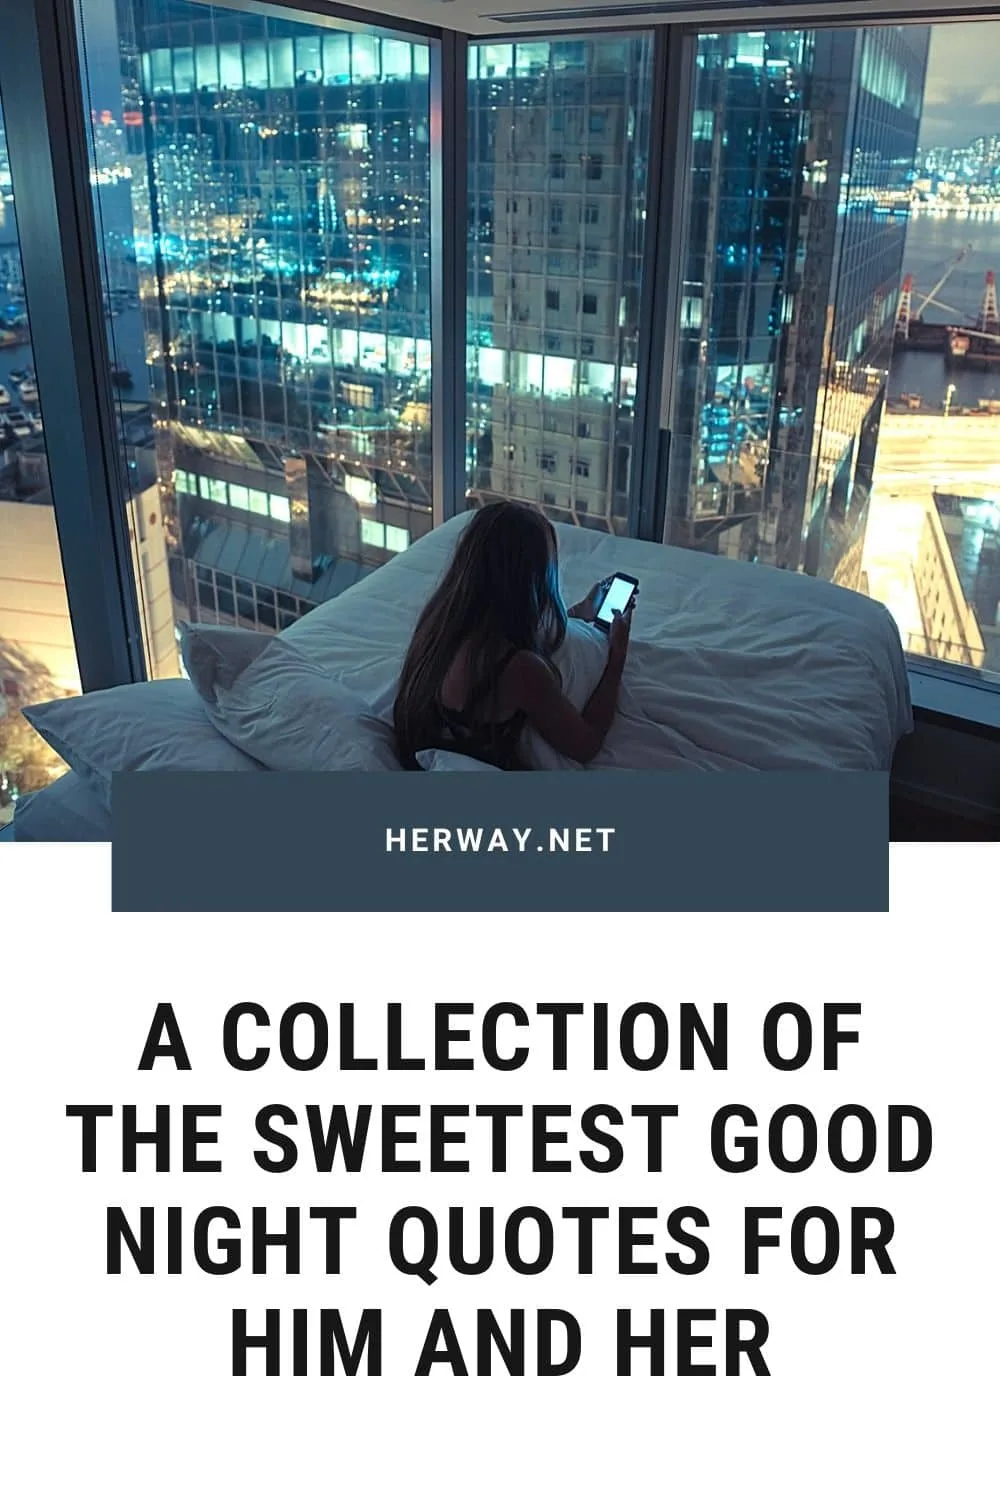 A Collection Of The Sweetest Good Night Quotes For Him And Her